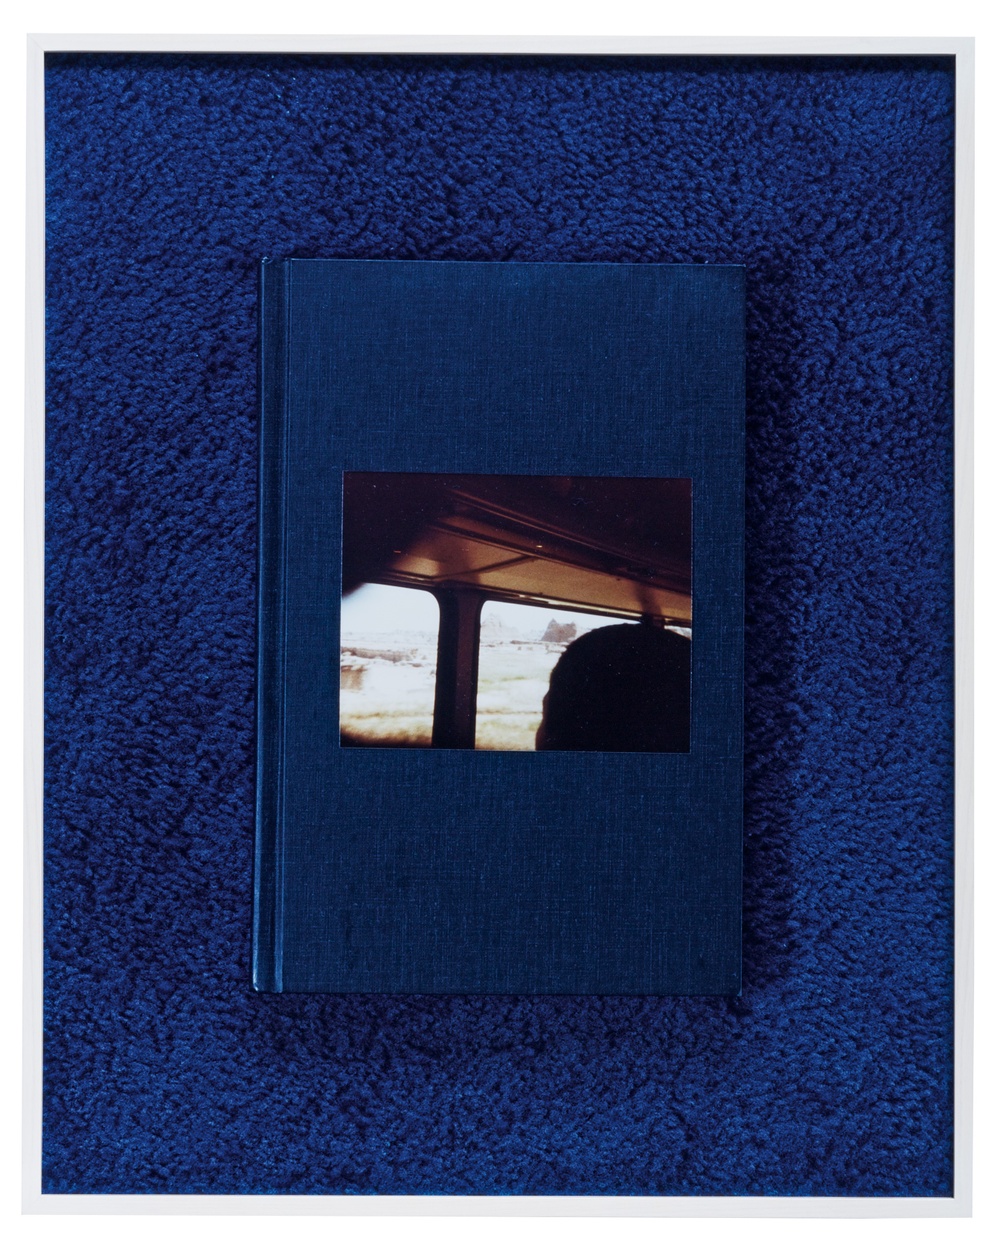 Against a blue carpet sits a blue book with a photograph affixed to the cover depicting a train’s interior with a silhouetted head looking out the window.